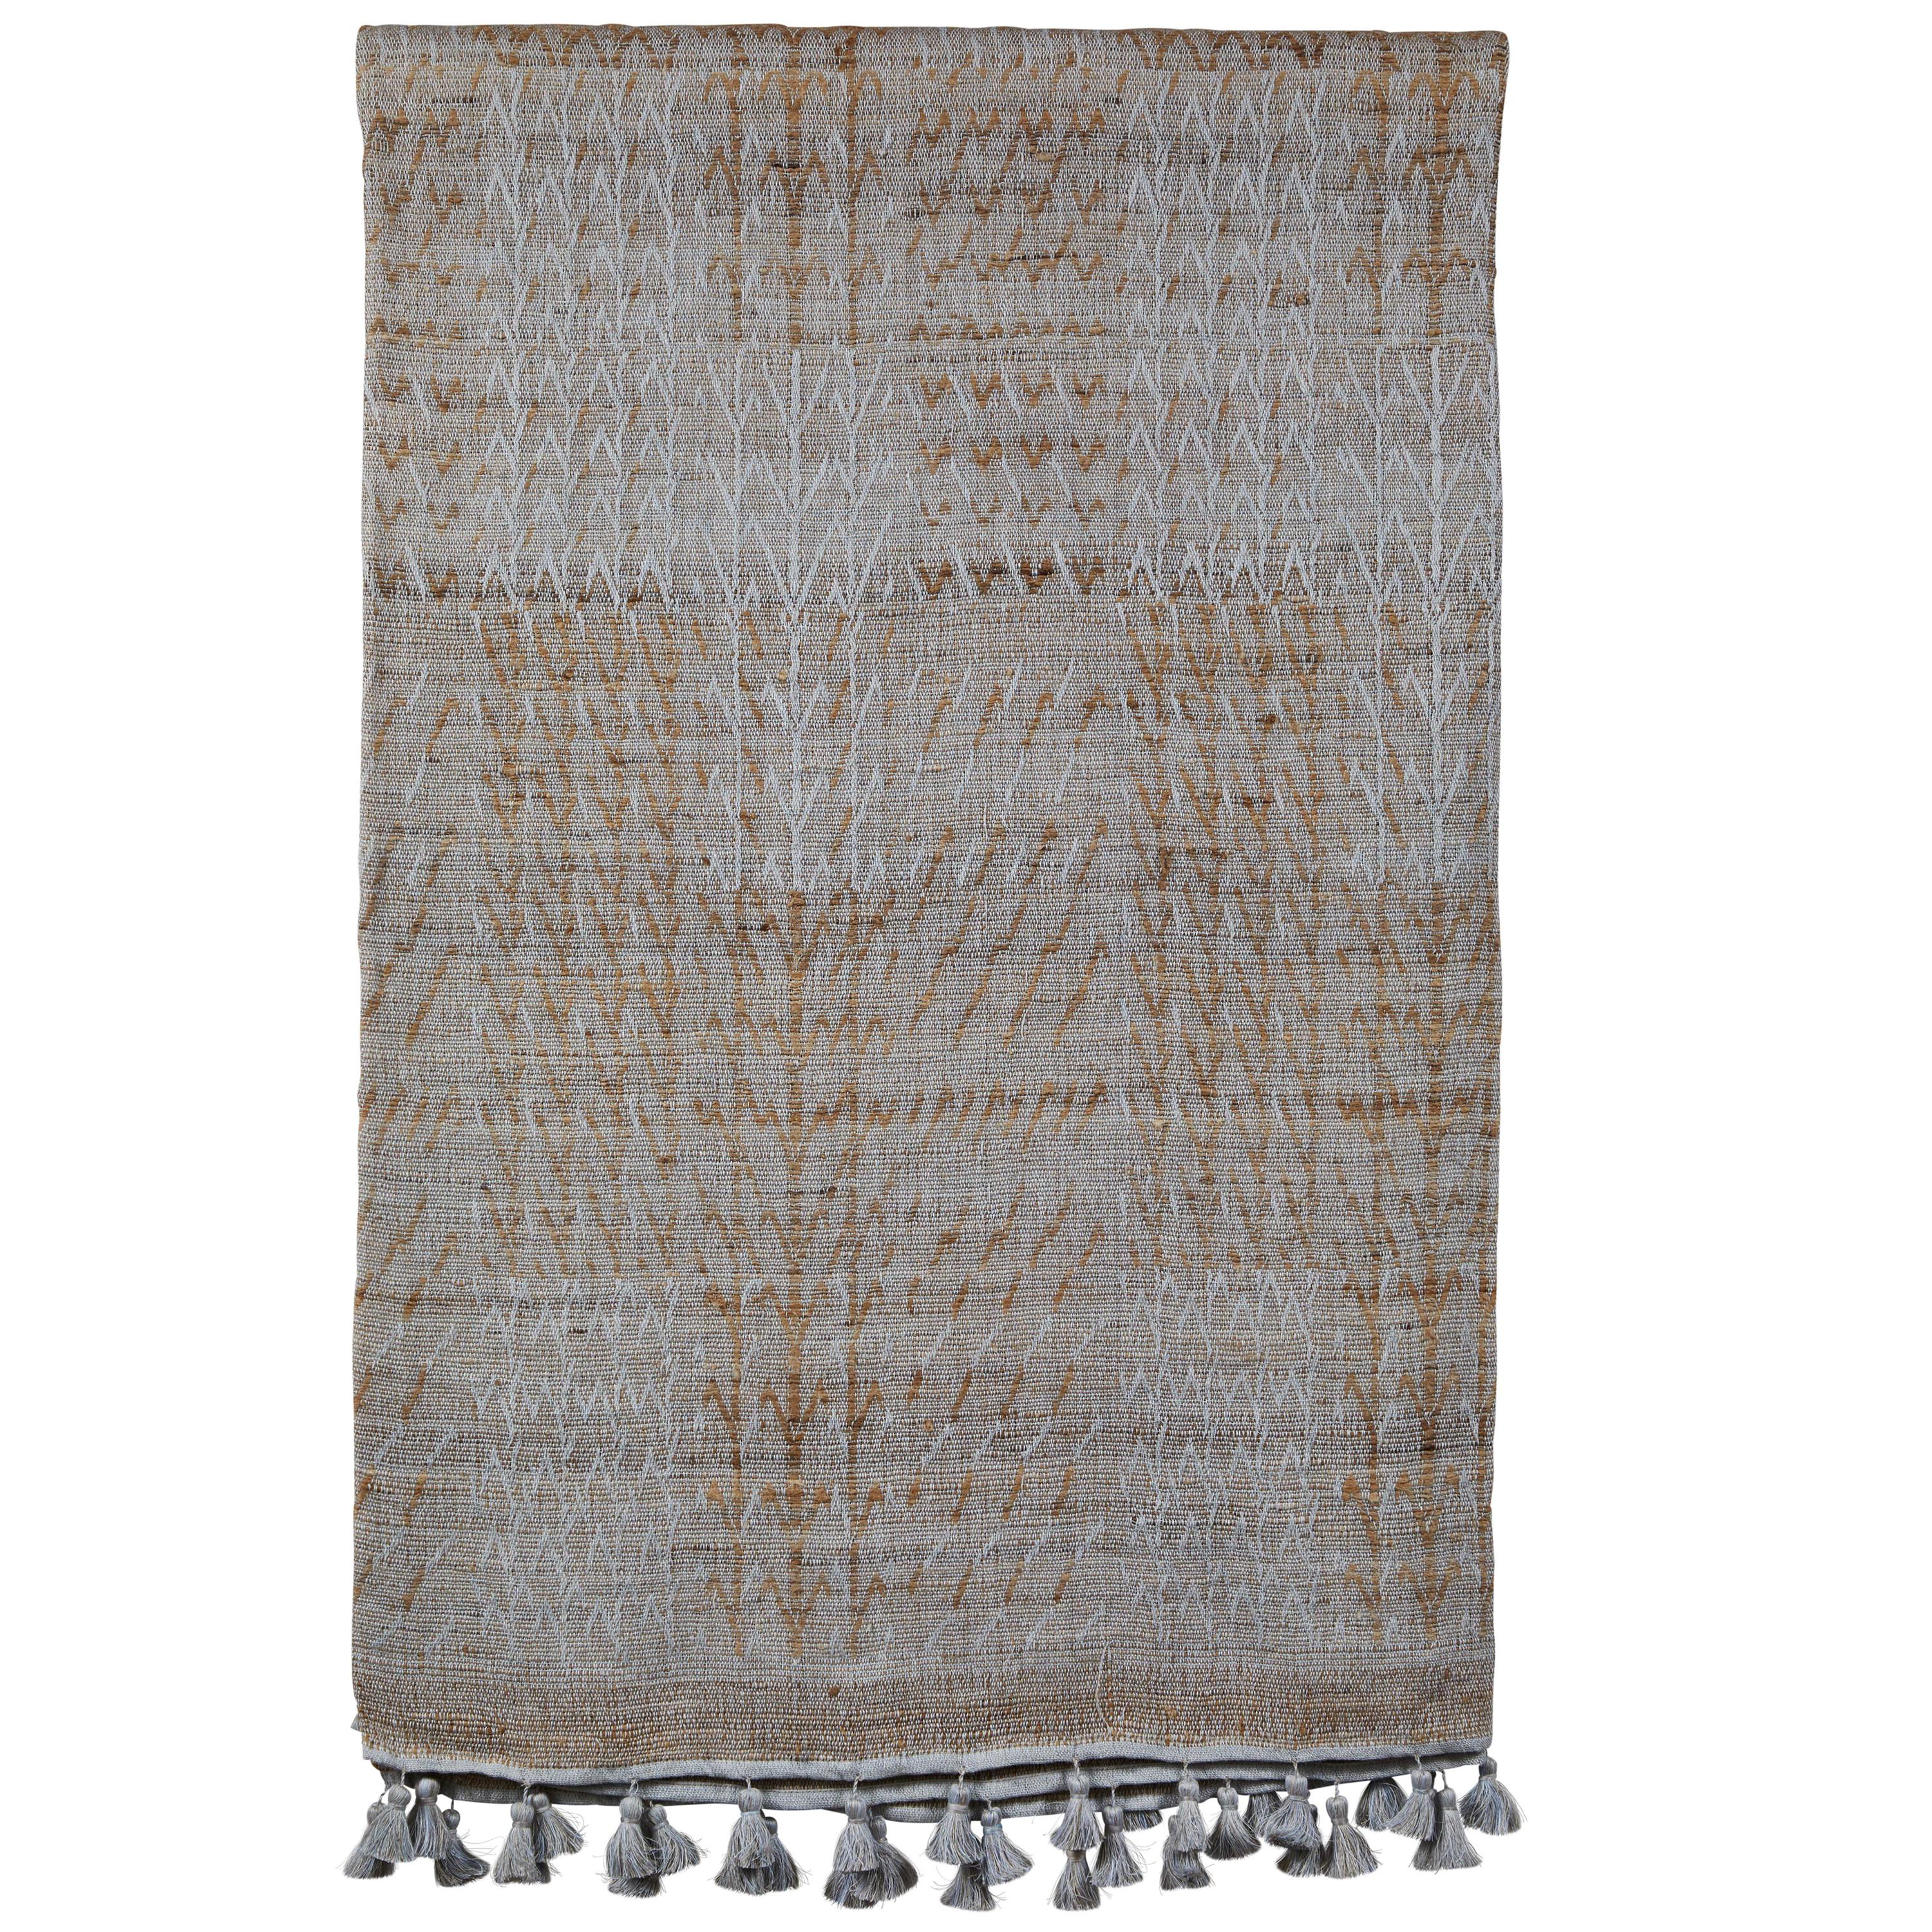 Indian Handwoven Bedcover For Sale